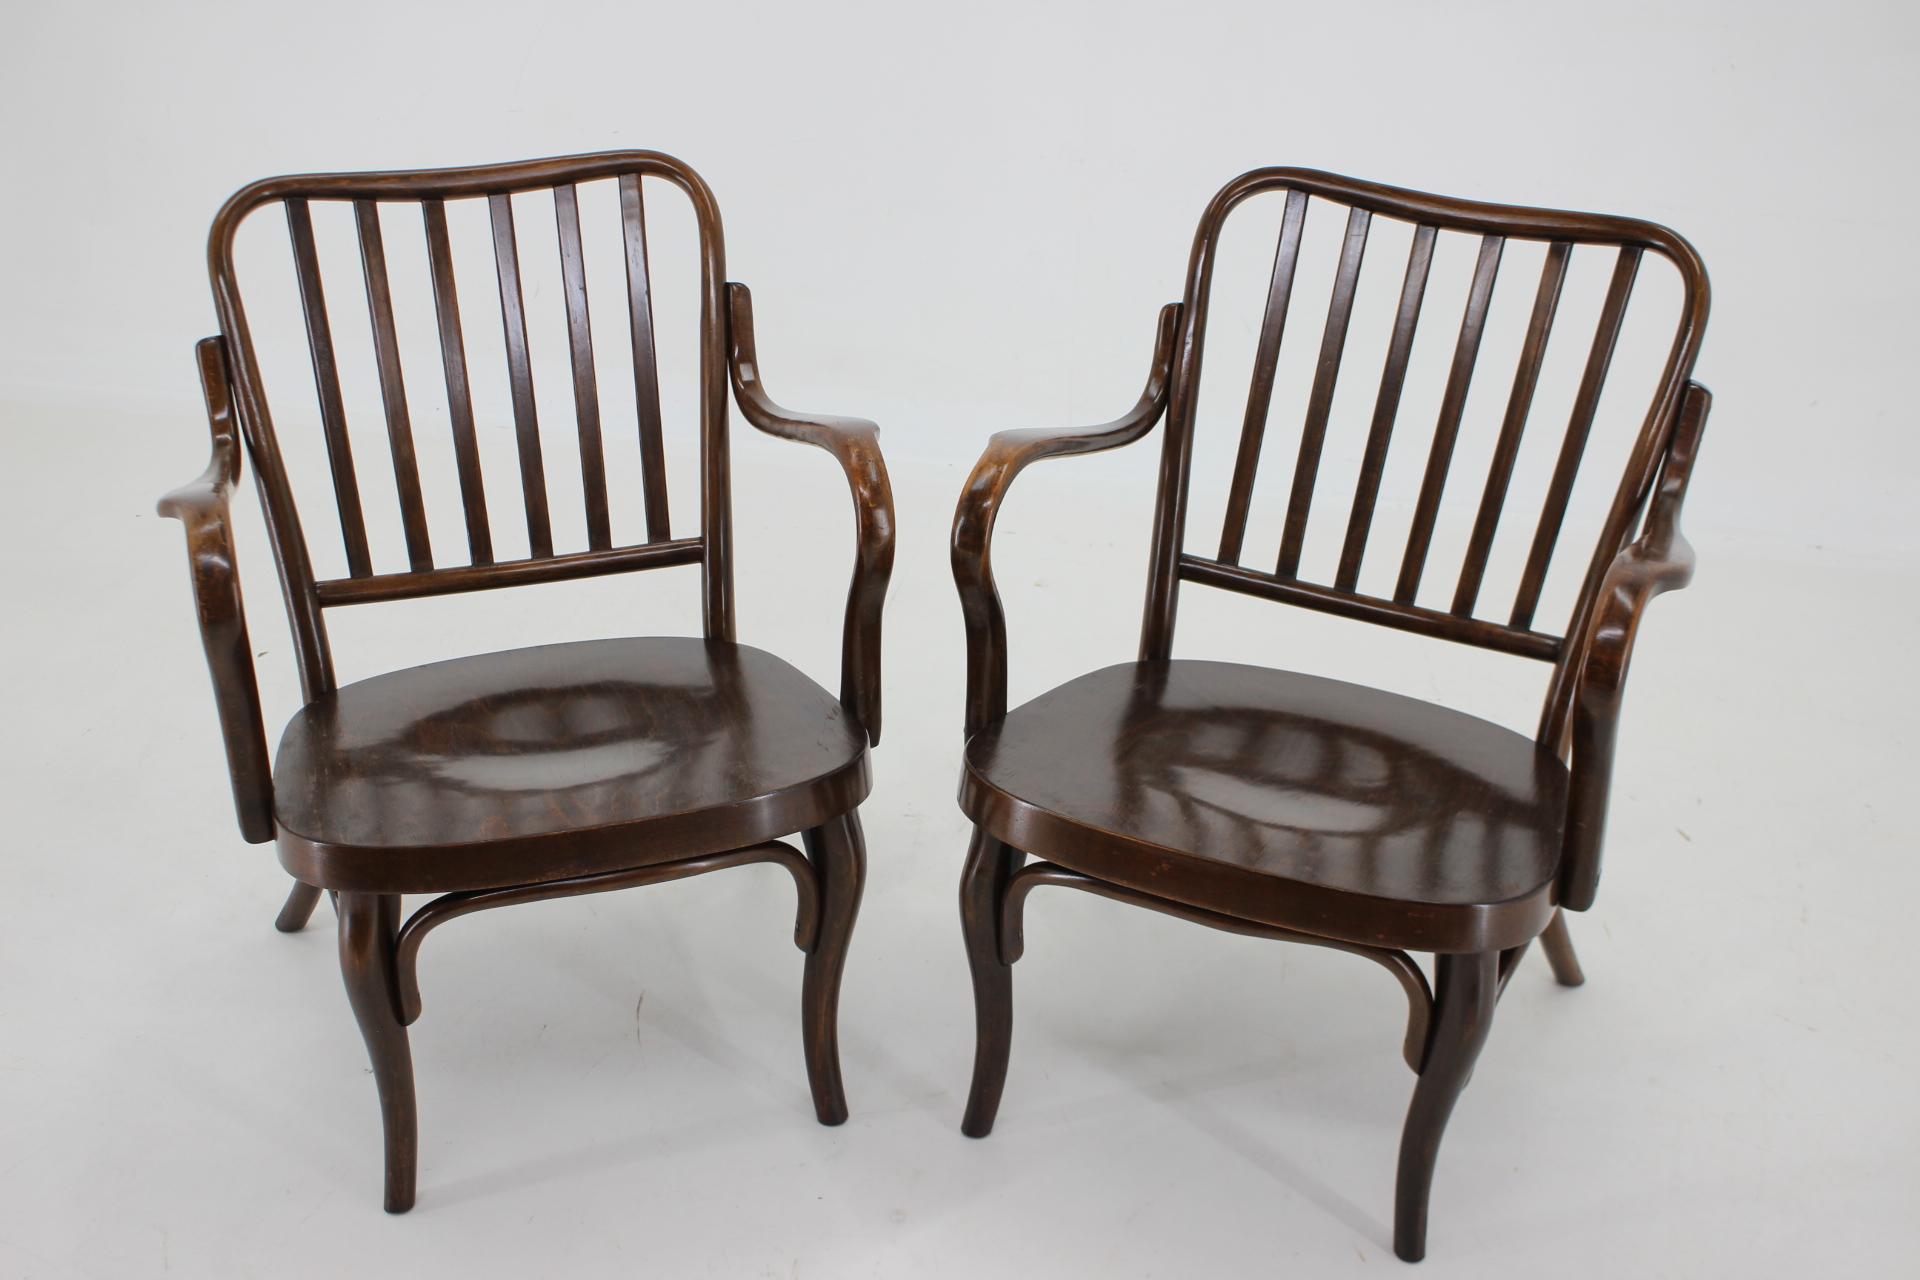 Art Deco 1930s Pair of Josef Frank Bentwood Armchairs no. 752 by Thonet